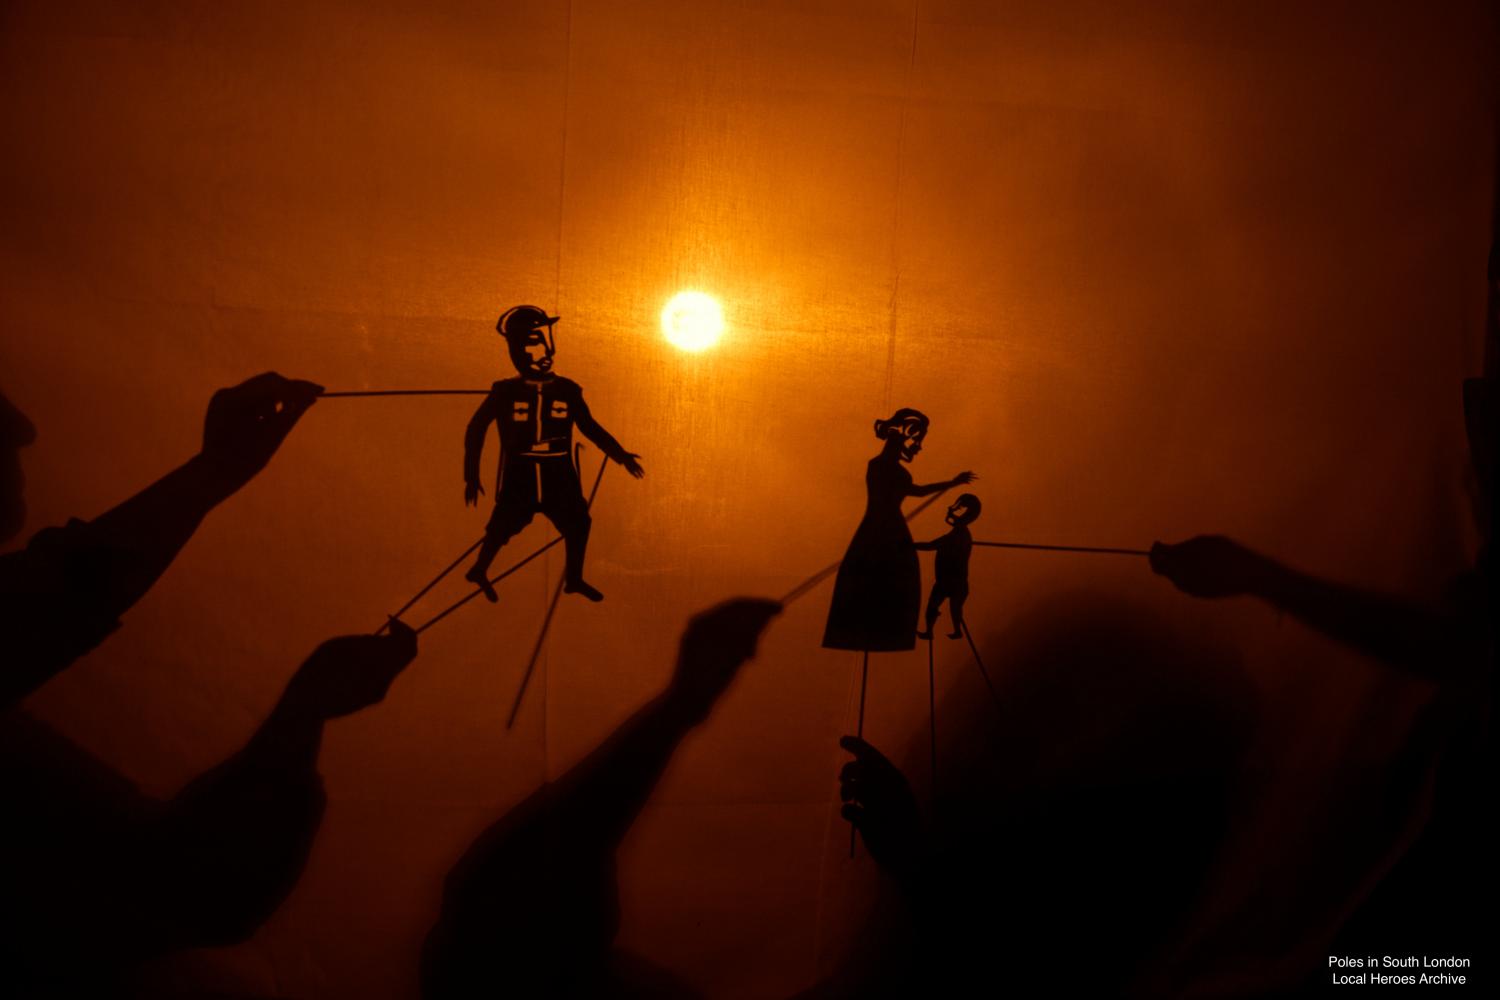 Shadow Theatre production (oral history stories)Poles in South London Project